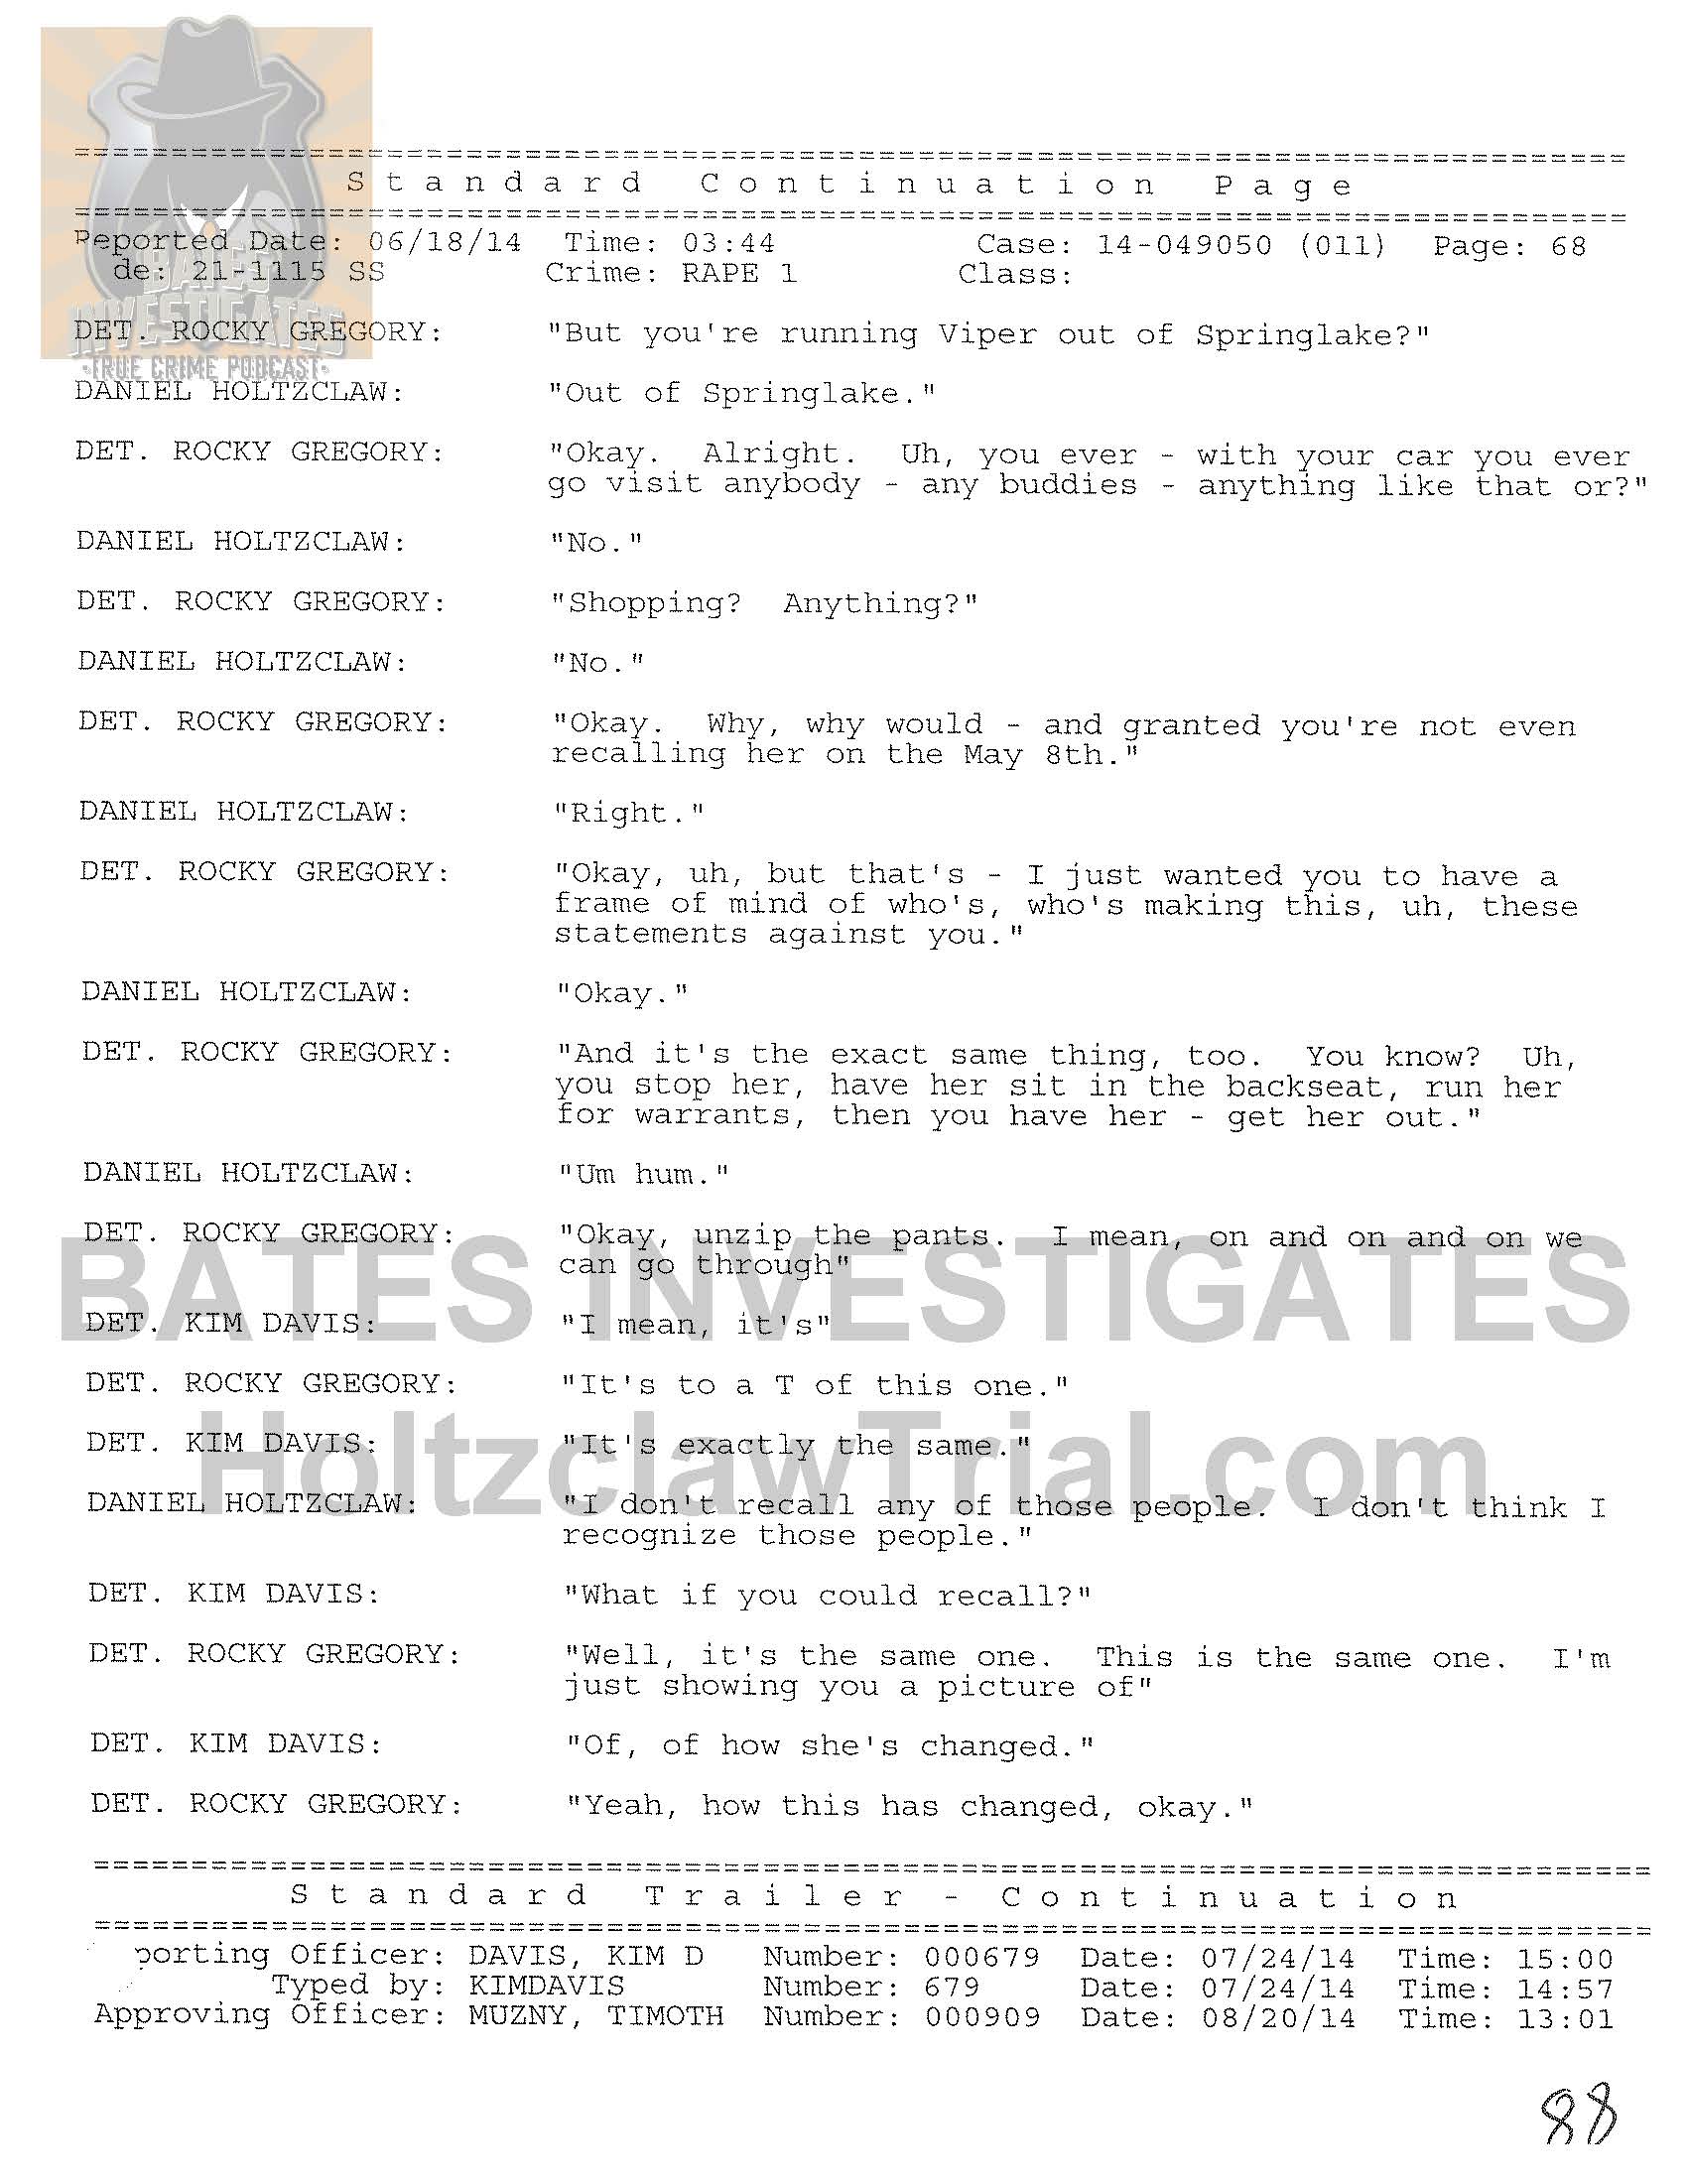 Holtzclaw Interrogation Transcript - Ep02 Redacted_Page_68.jpg